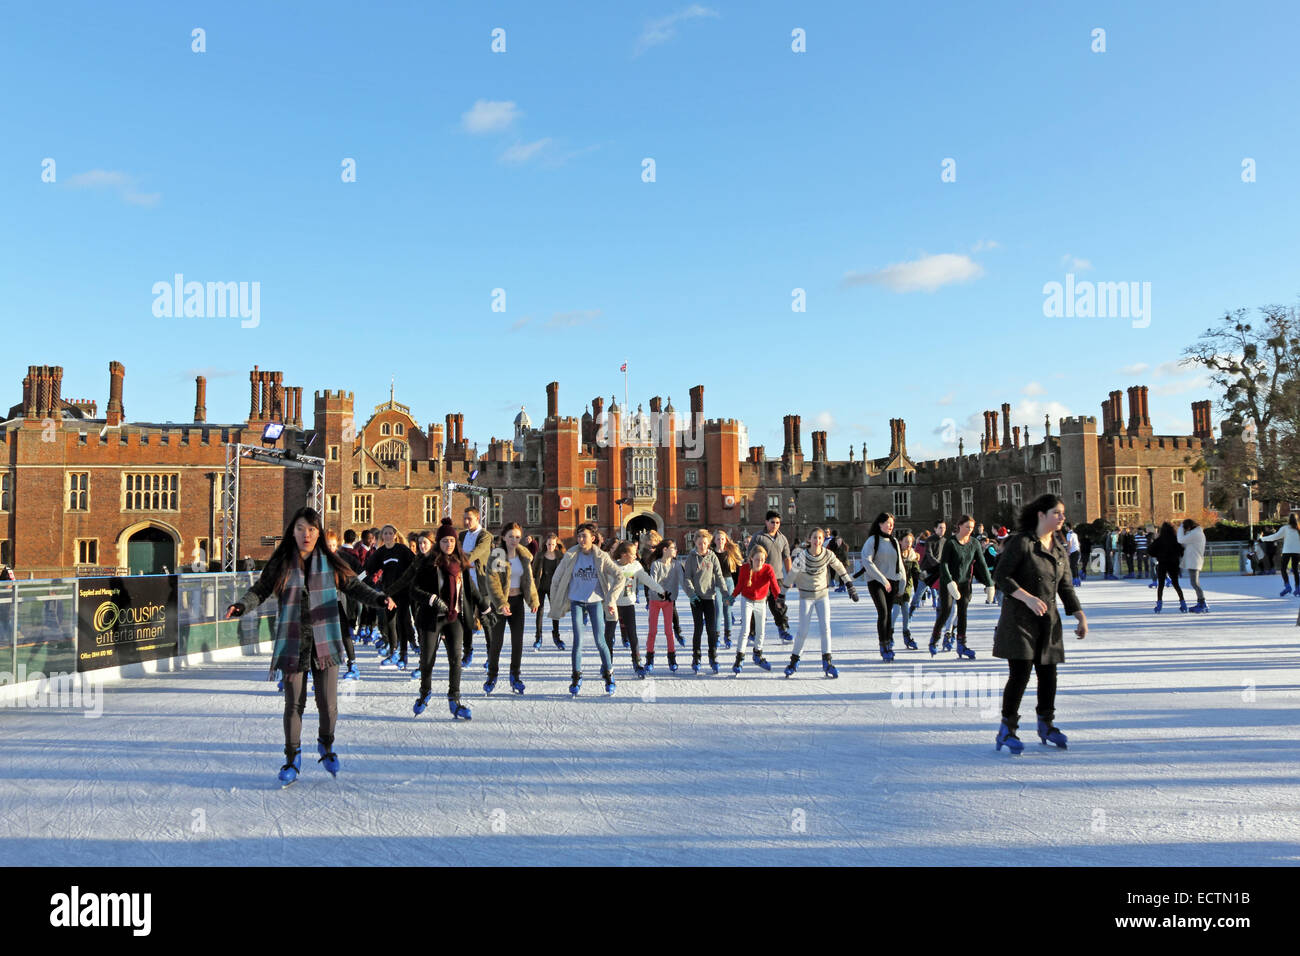 Hampton Court, SW London, England UK. 19th December 2014. On chilly but sunny day in SW London, friends, families and school parties enjoy festive fun at the Ice Rink in the grounds of Hampton Court Palace. It is a magical setting, surrounded by the Tudor Palace of Henry VIII, the River Thames and the gardens of Hampton Court. Stock Photo